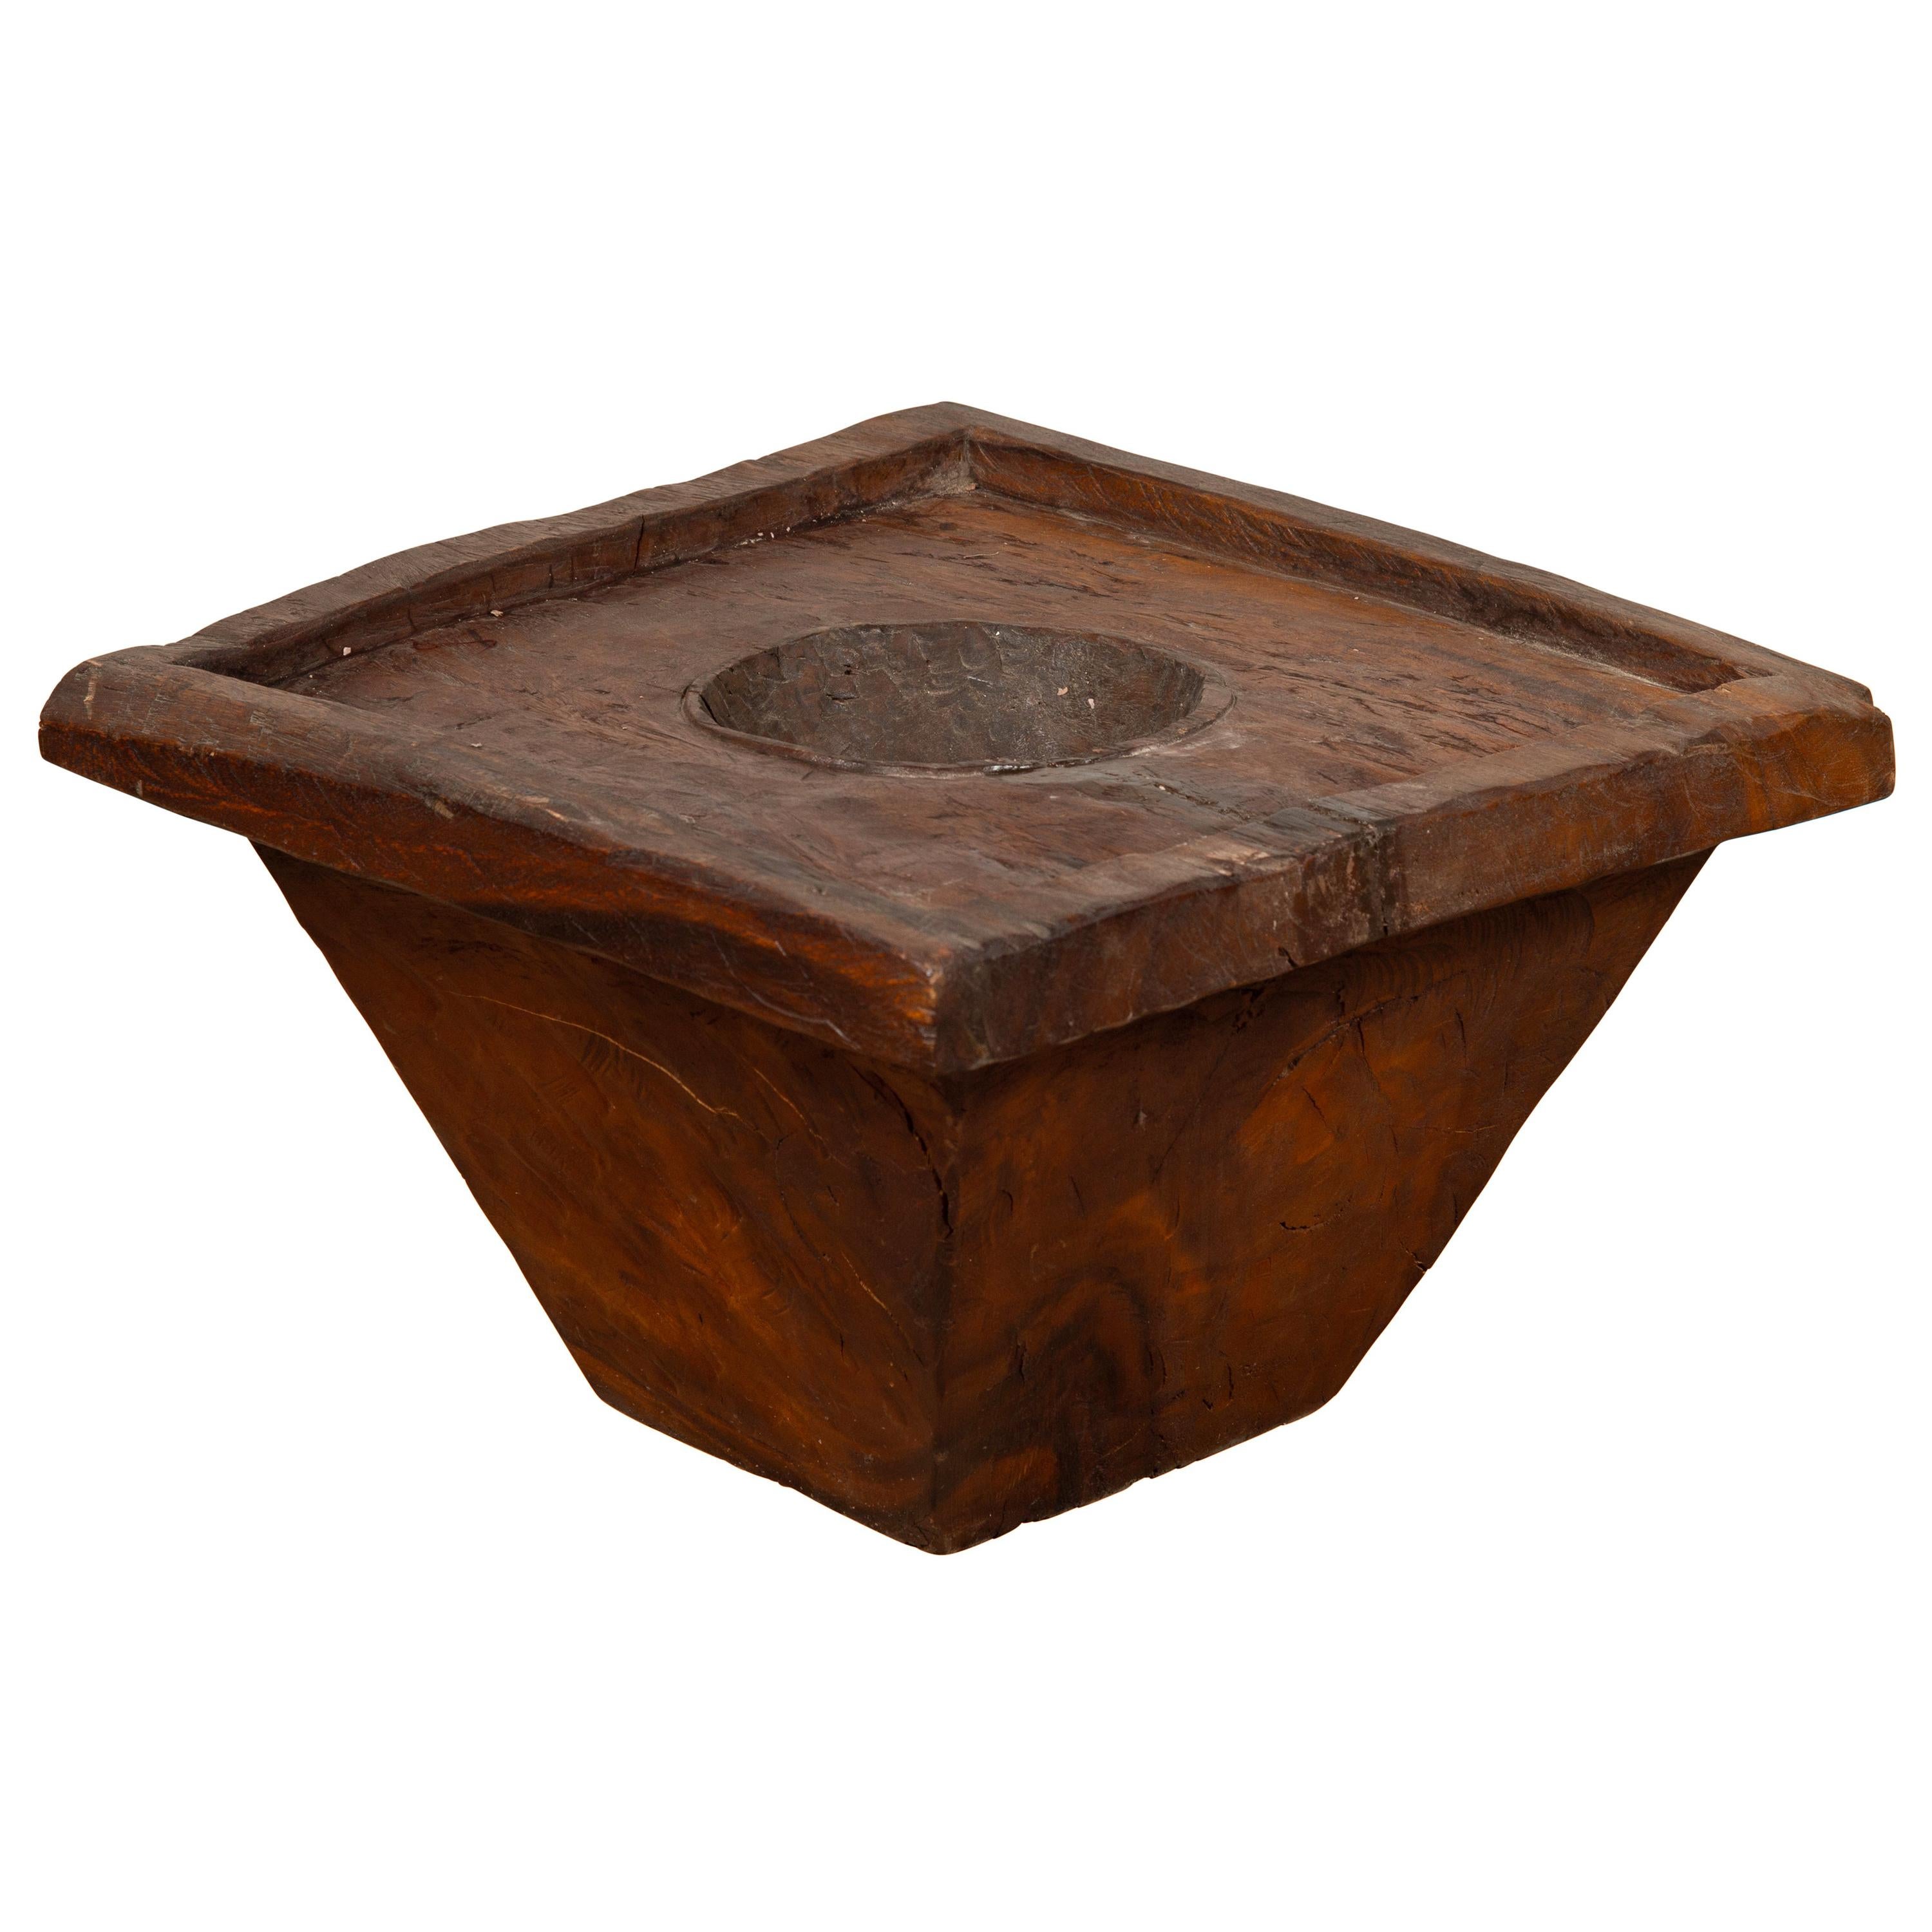 Wooden Indonesian Brown Mortar Planter from the Early 20th Century